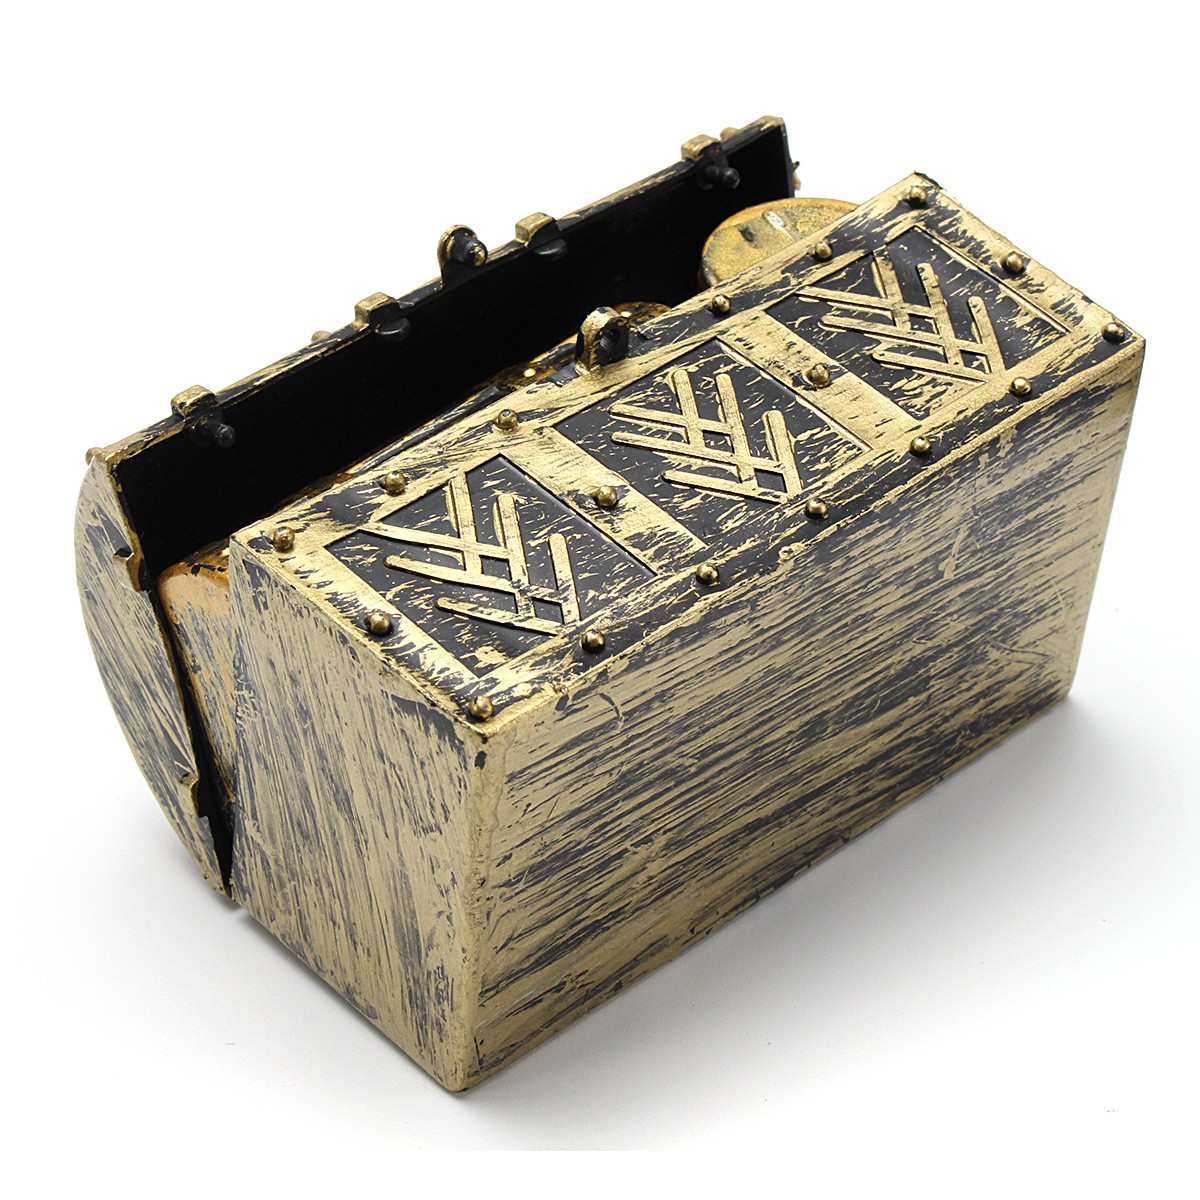 Vintage Pirate Jewelry Storage Box Holder Treasure Chest Gift Box Bag For Necklace Bracelets